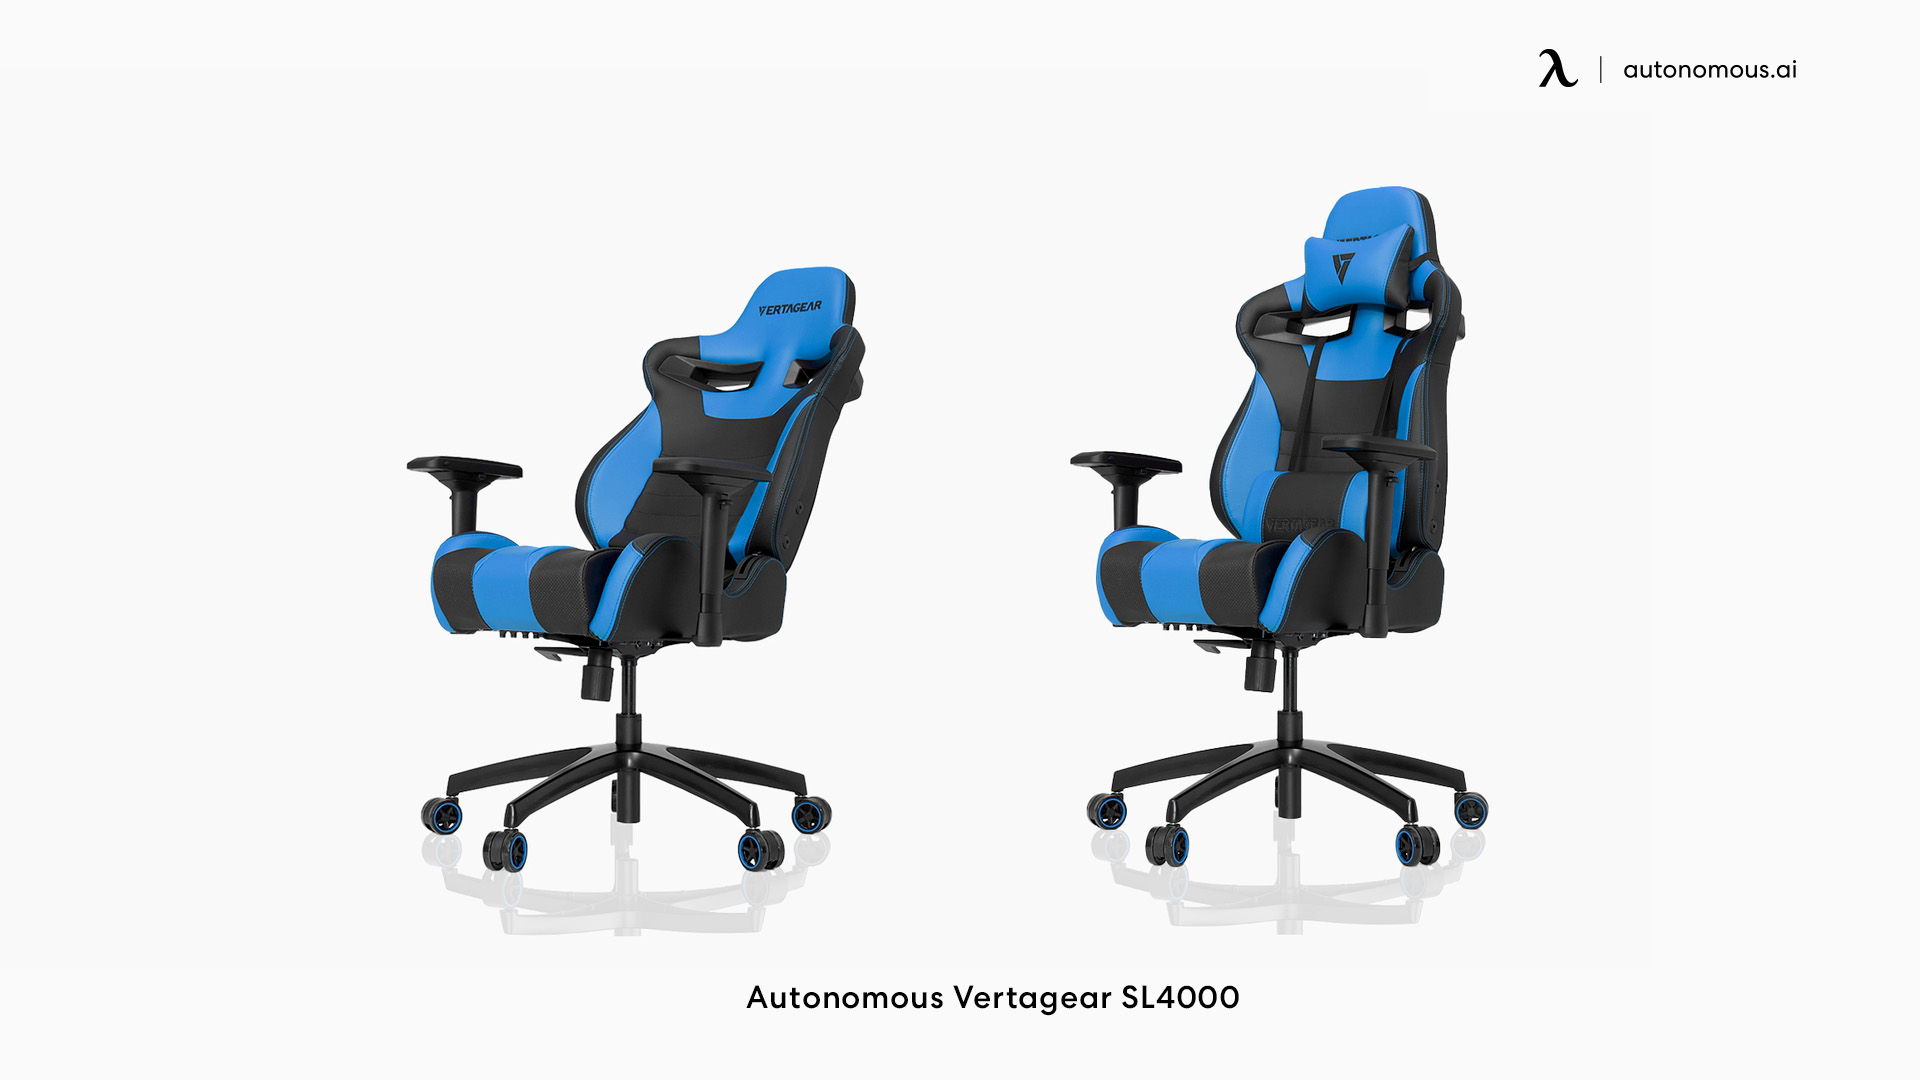 SL4000 black leather gaming chair by Vertagear